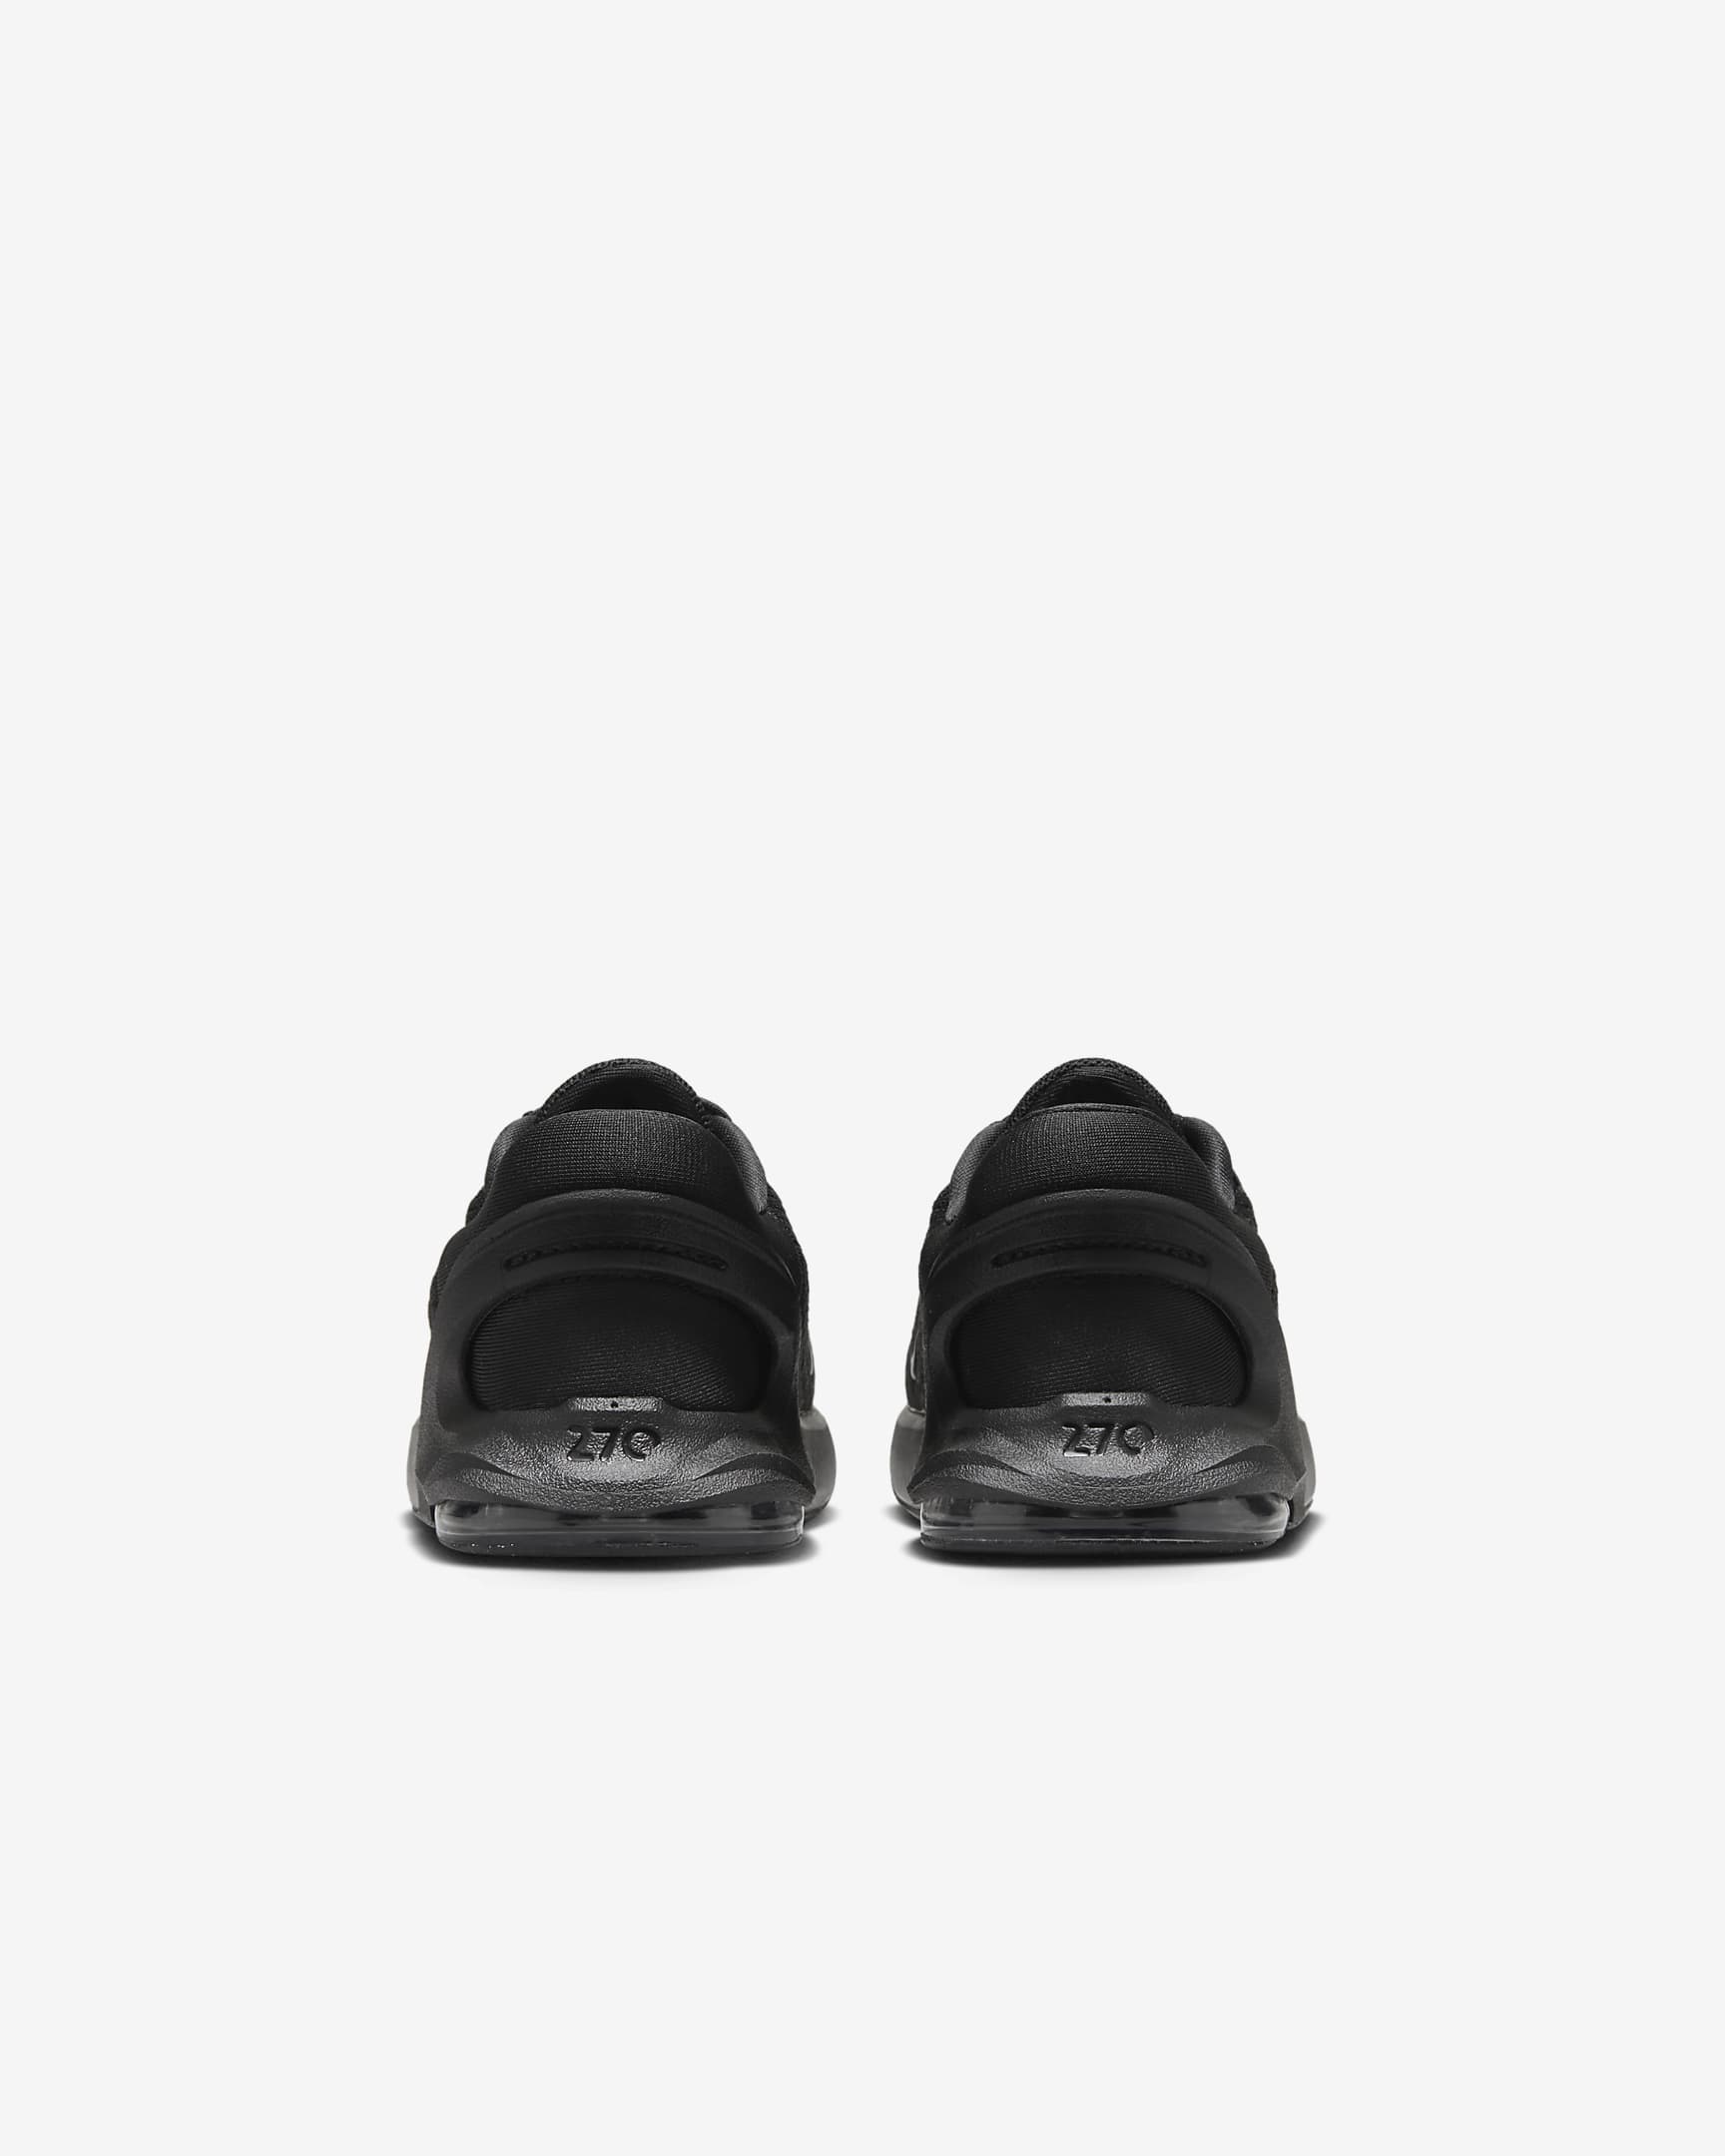 Nike Air Max 270 GO Baby/Toddler Easy On/Off Shoes. Nike HU